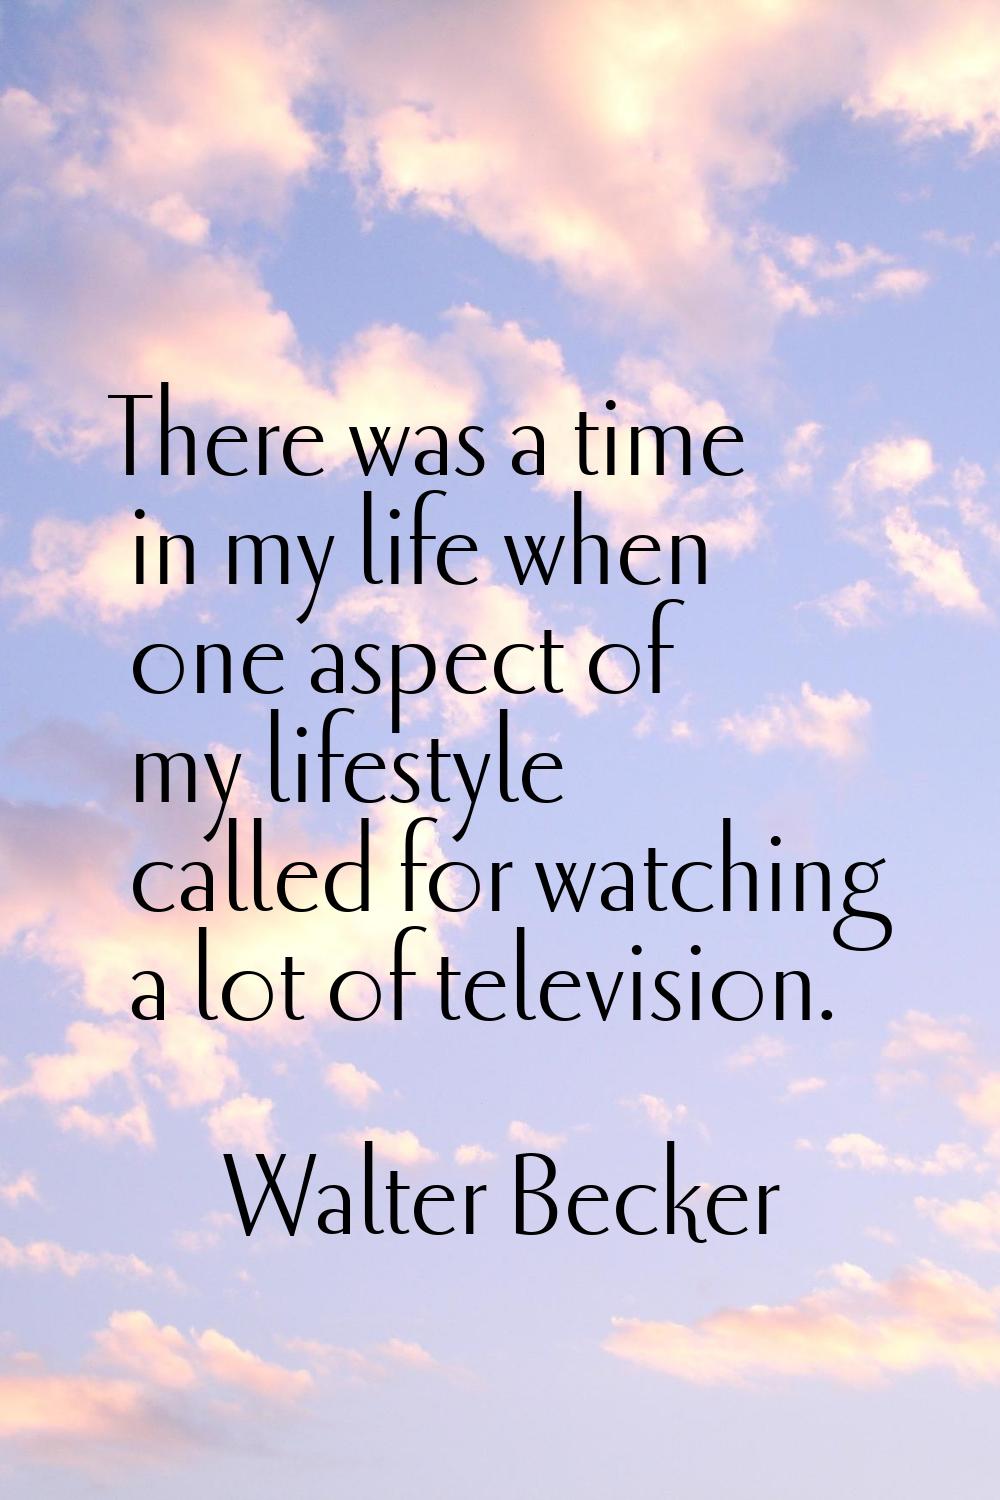 There was a time in my life when one aspect of my lifestyle called for watching a lot of television